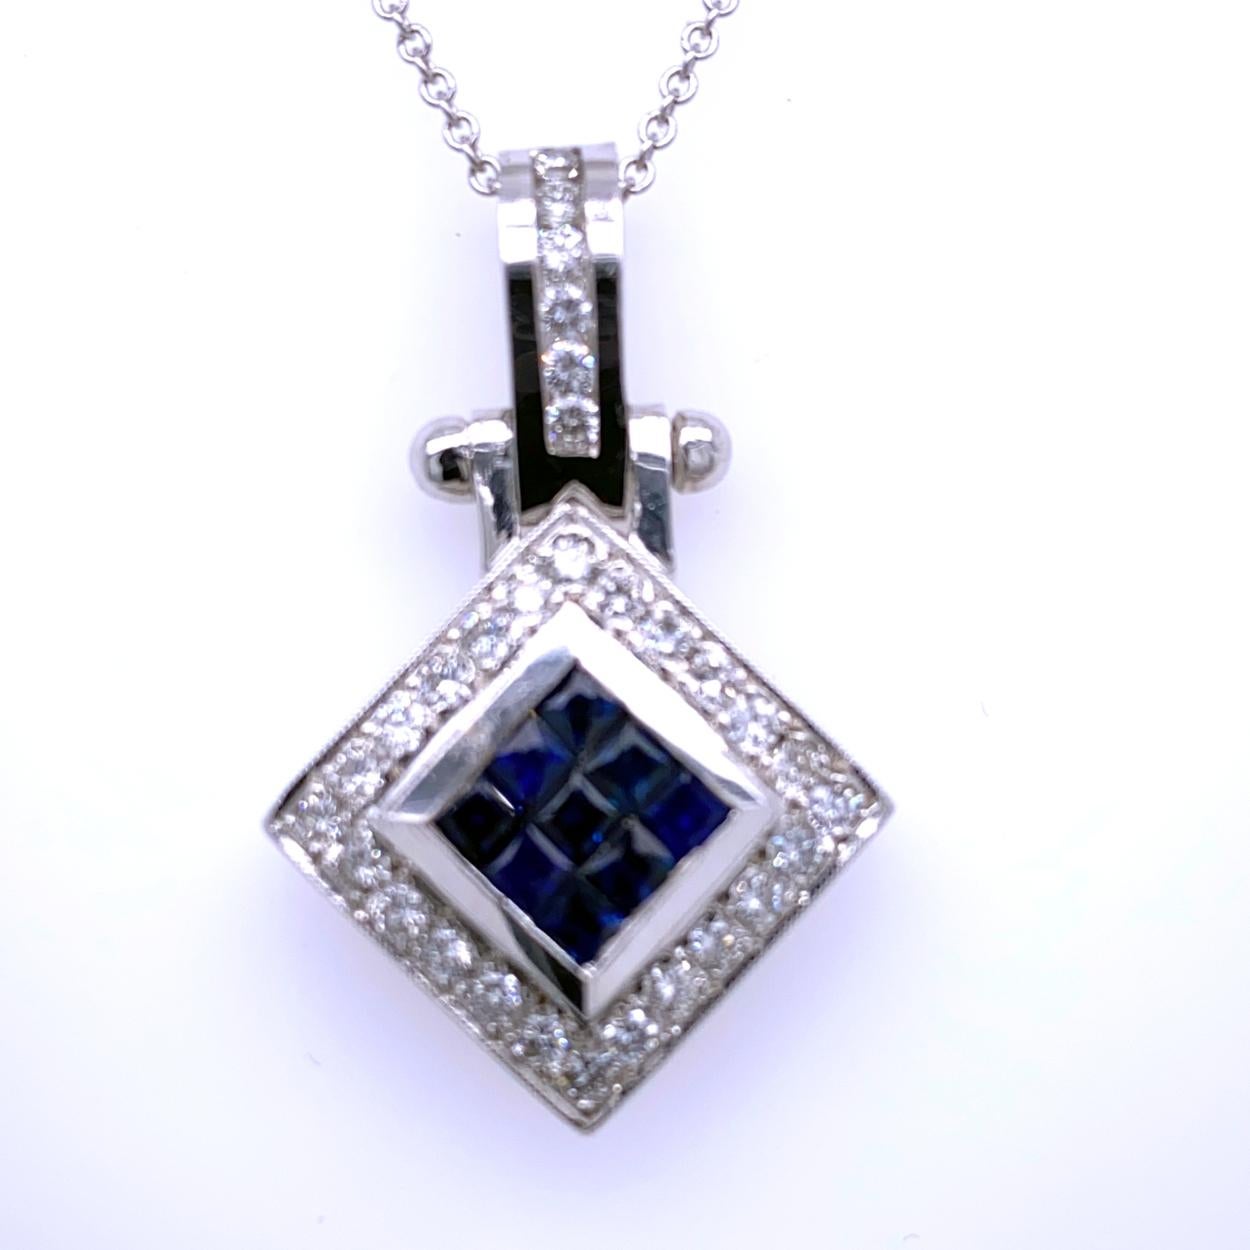 18K Gold Square Shape Diagonal Pendant with 9 Invisible Set Princess Cut Blue Sapphires (Total Gem Weight 0.97 Ct) surrounded by a pave set Halo of diamonds and channel set Bale with total weight of 0.81 Ct. 
Total Diamond Weight: 0.81 Ct
Total Gem